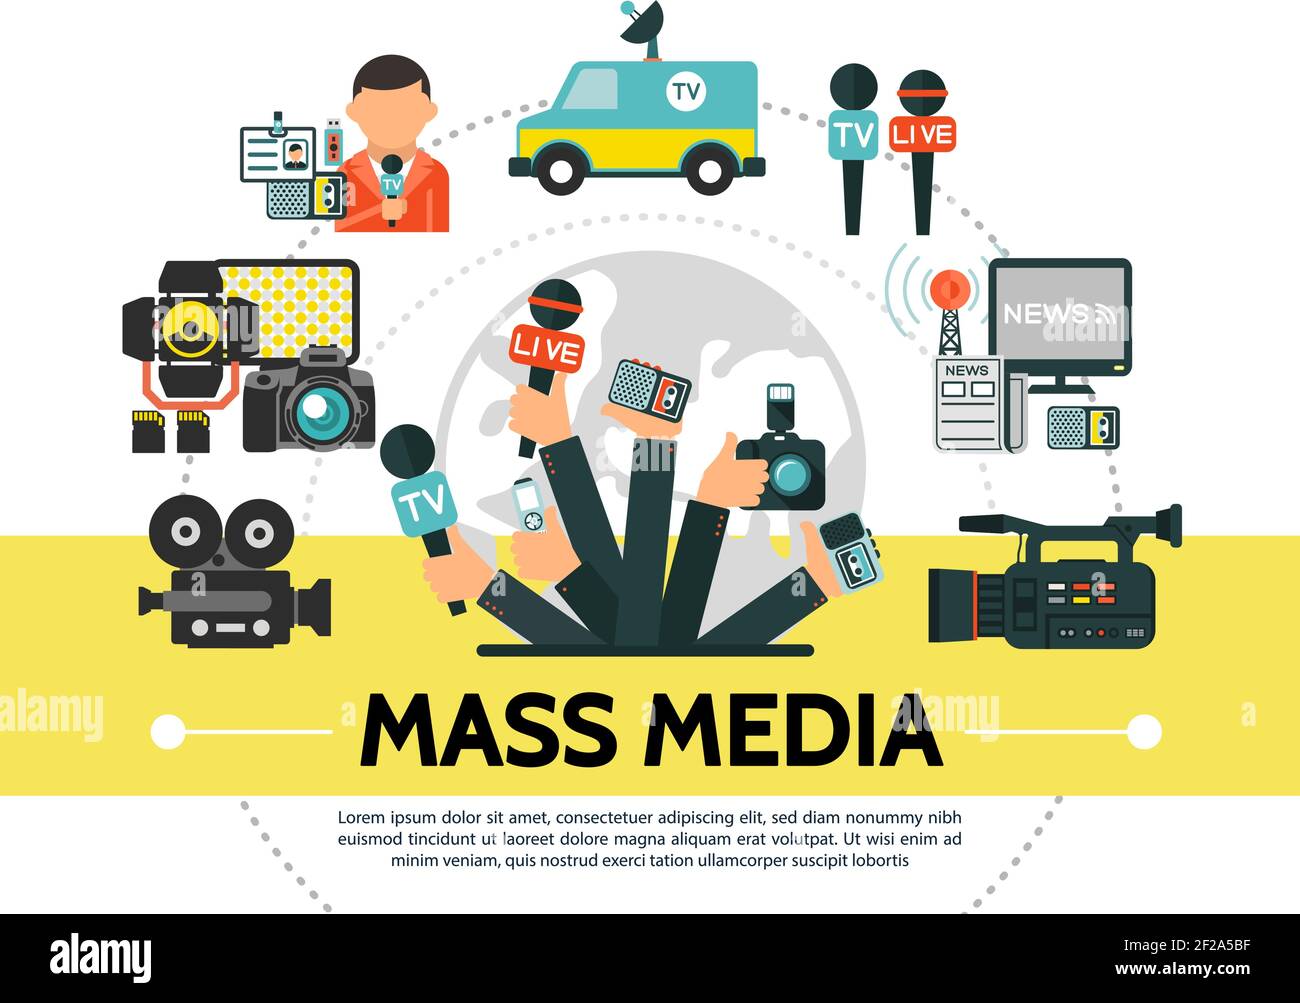 Flat mass media concept with photo video cameras microphones news car flash usb drive reporter radio tower journalists hands holding professional devi Stock Vector